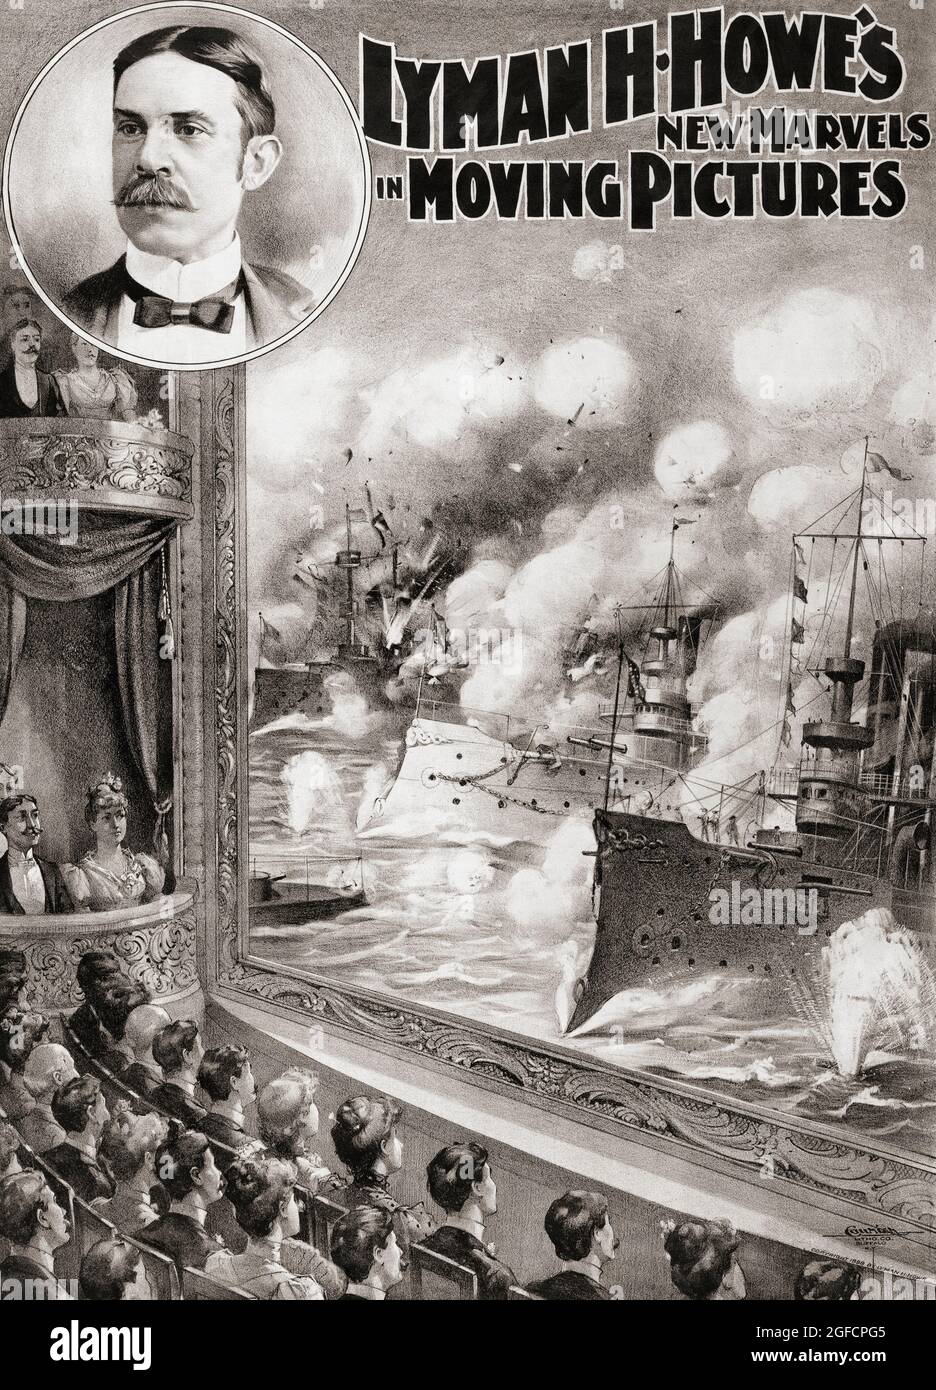 Lyman H. Howe's New Marvels in Moving Pictures.  An 1898 poster with a fanciful display of American battleships engaged in the Spanish-American war and a portrait of Howe at the top left.  Lyman Hakes Howe, 1856 - 1923, American entertainment entrepreneur and innovator.  He was making aerial films by 1911 and - with the use of a phonograph - is credited with being the first film-maker to marry sound effects to his movies. Stock Photo